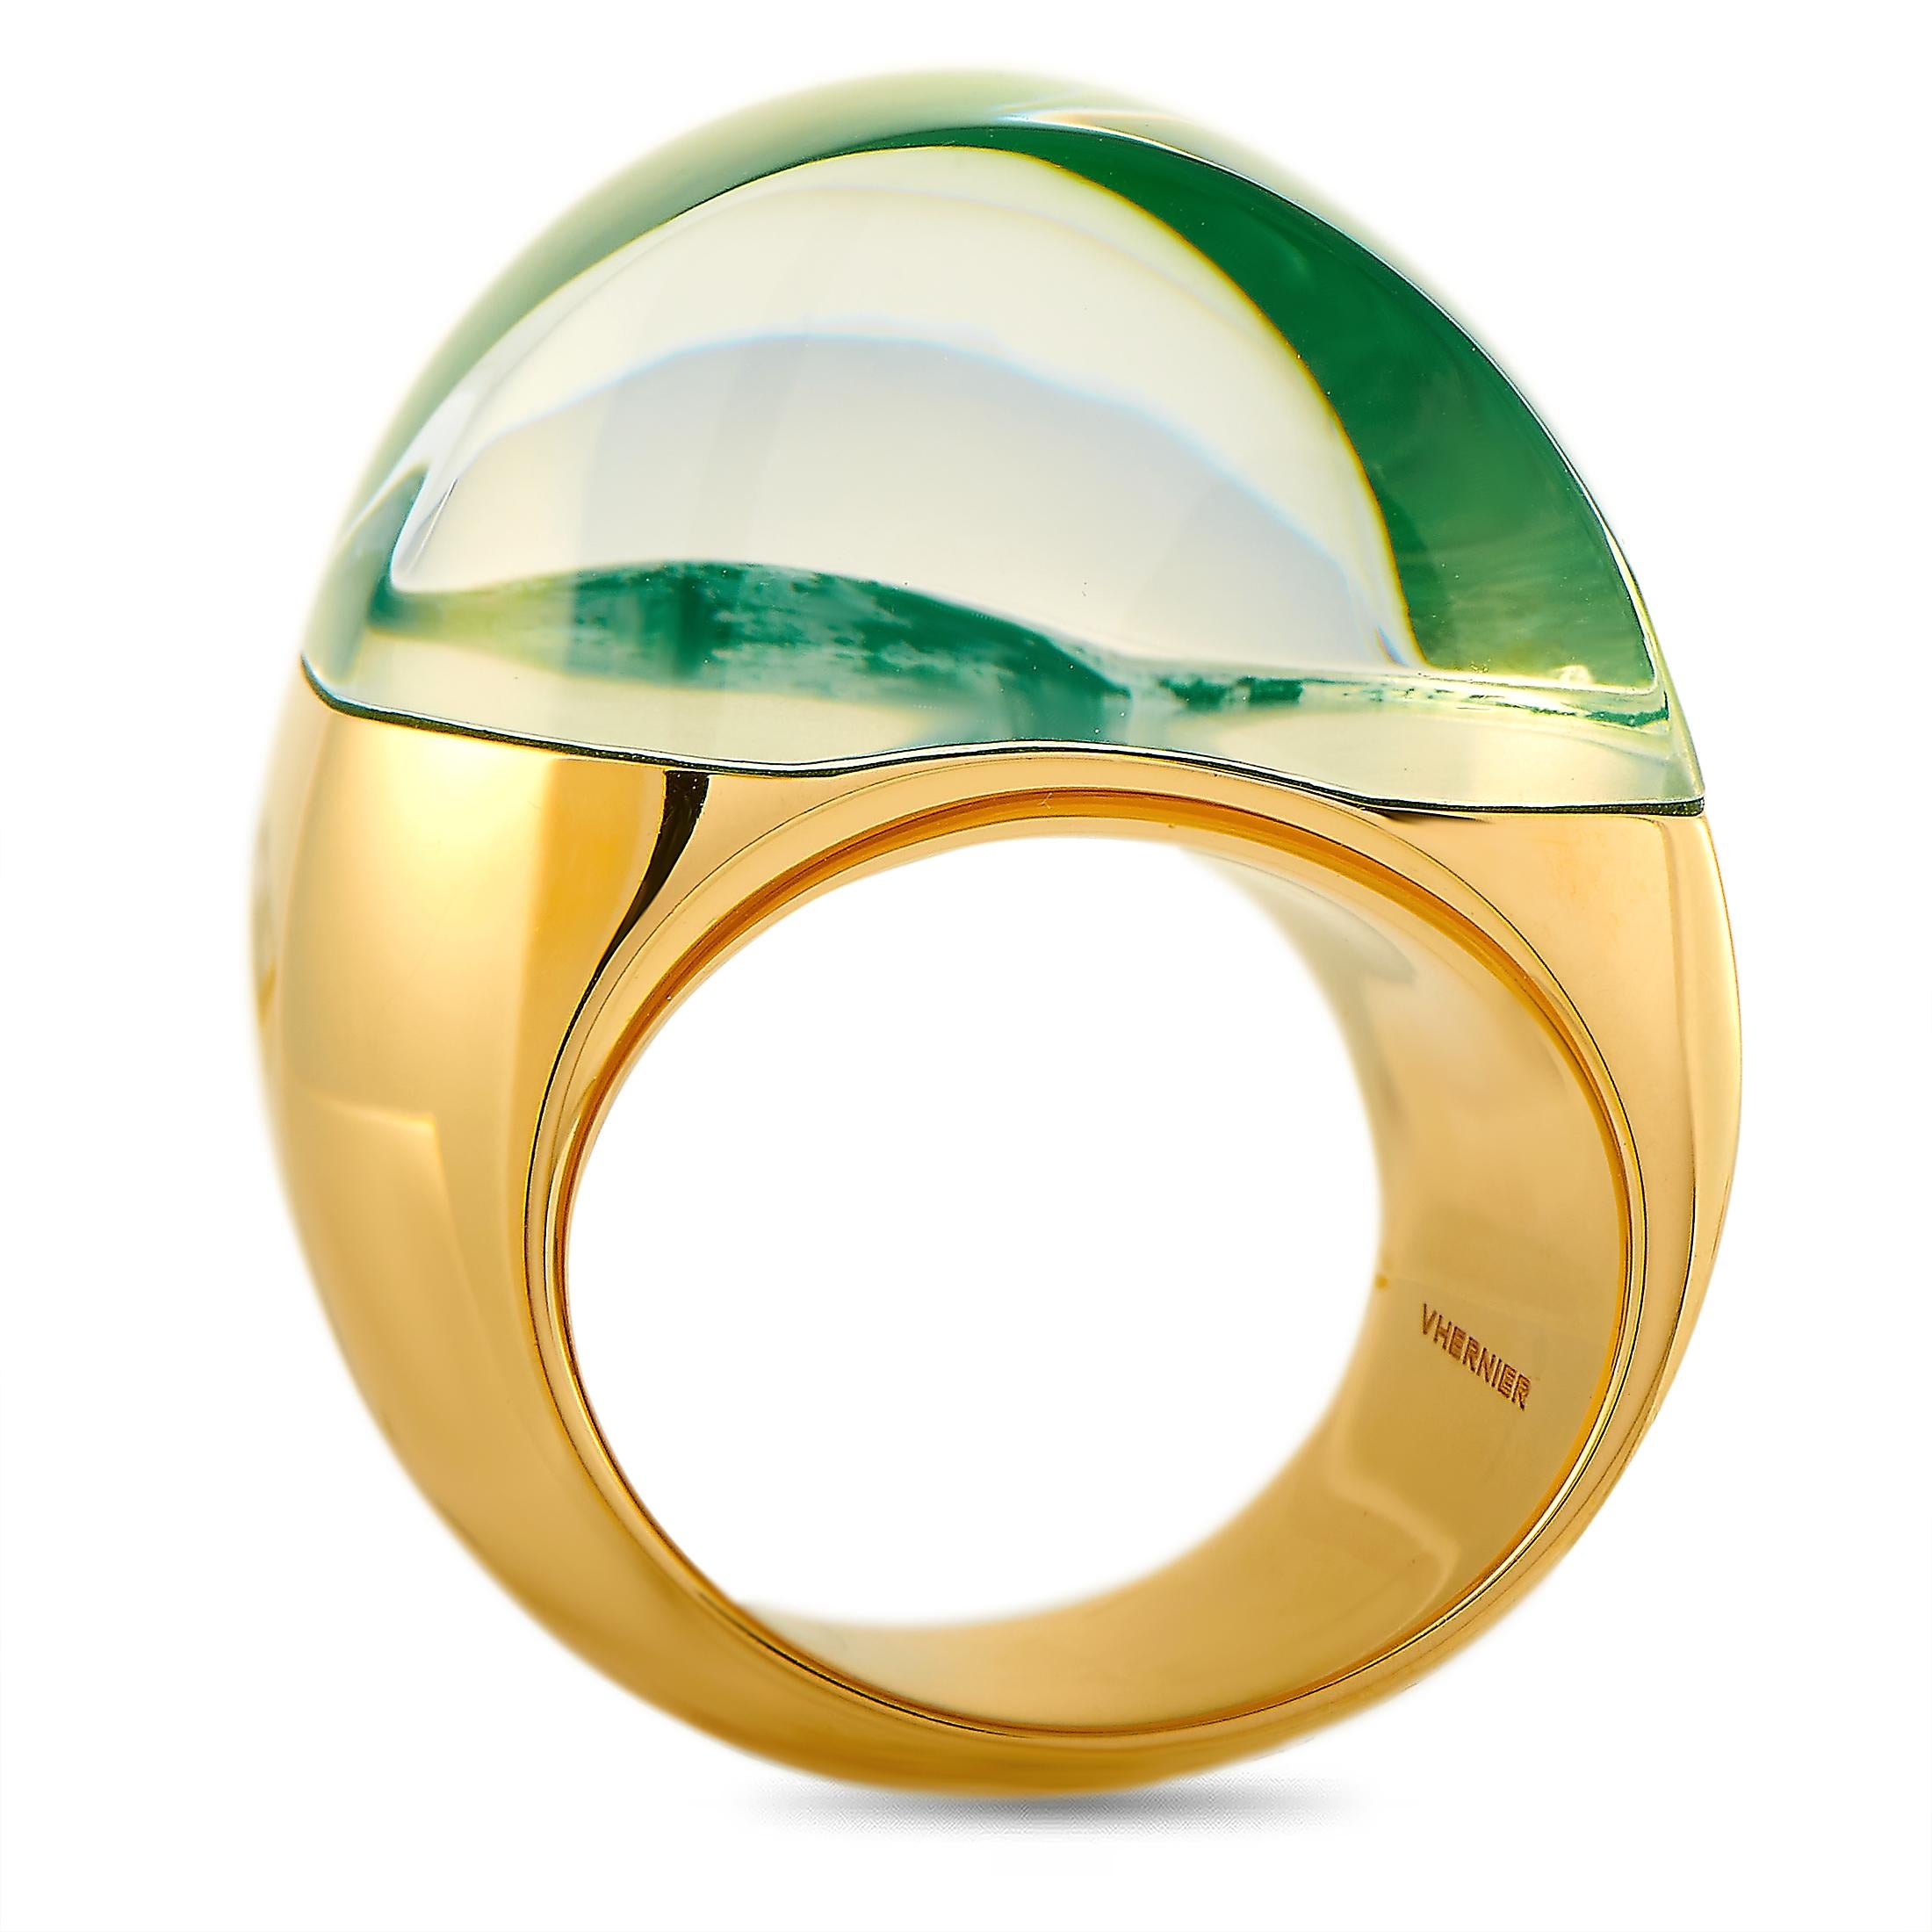 The Vhernier “Aladino” ring is made of 18K rose gold and embellished with jade and rock crystal. The ring weighs 23.4 grams and boasts band thickness of 10 mm and top height of 14 mm, while top dimensions measure 16 by 28 mm.
Ring Size: 7

This item